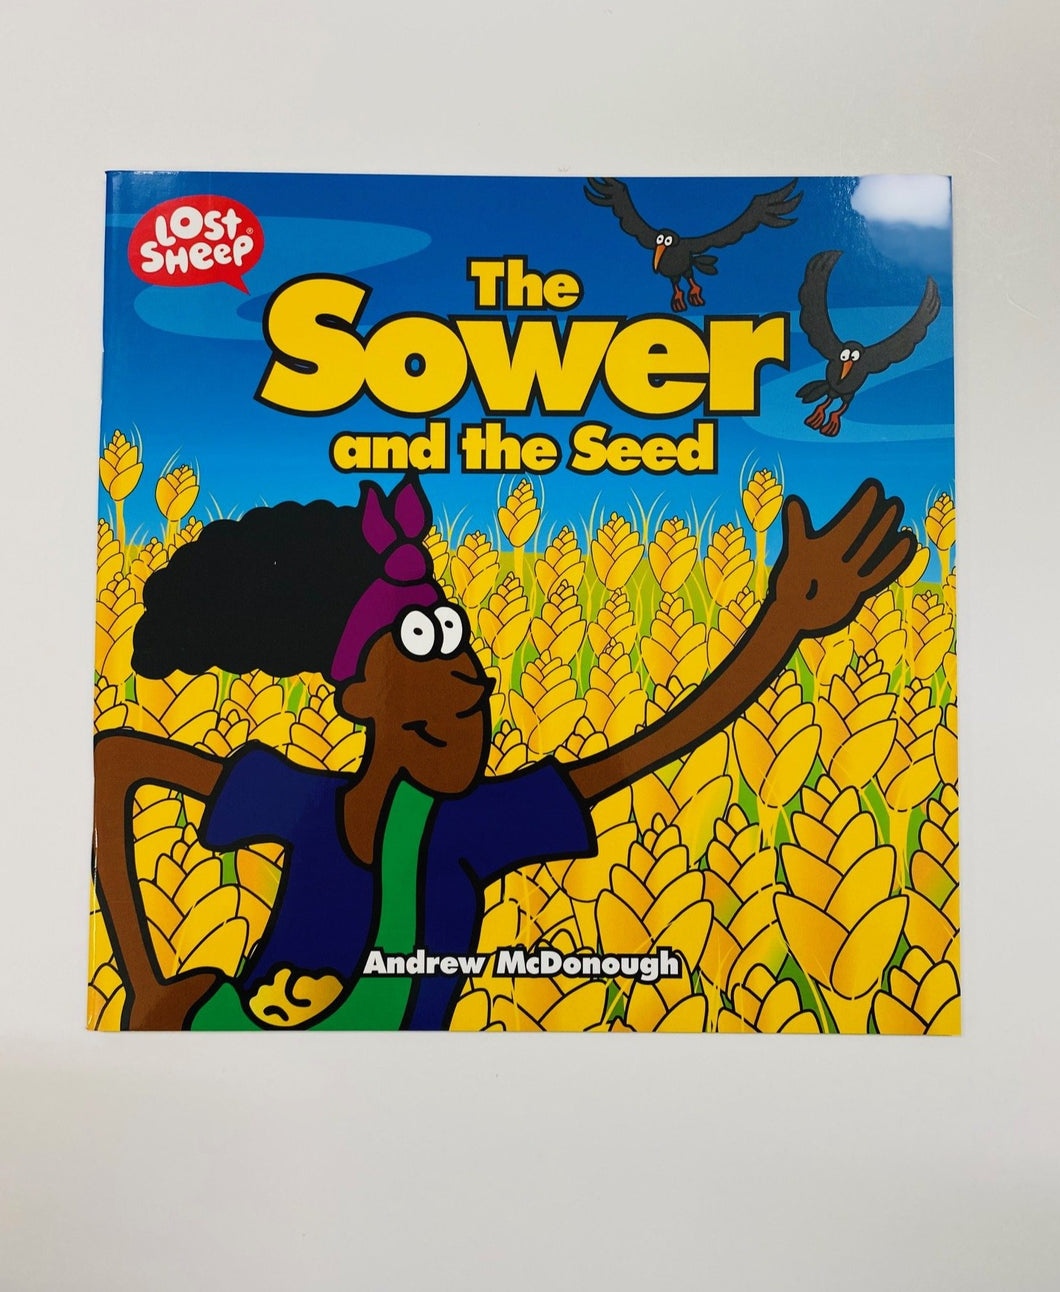 Lost Sheep: The Sower and the Seed